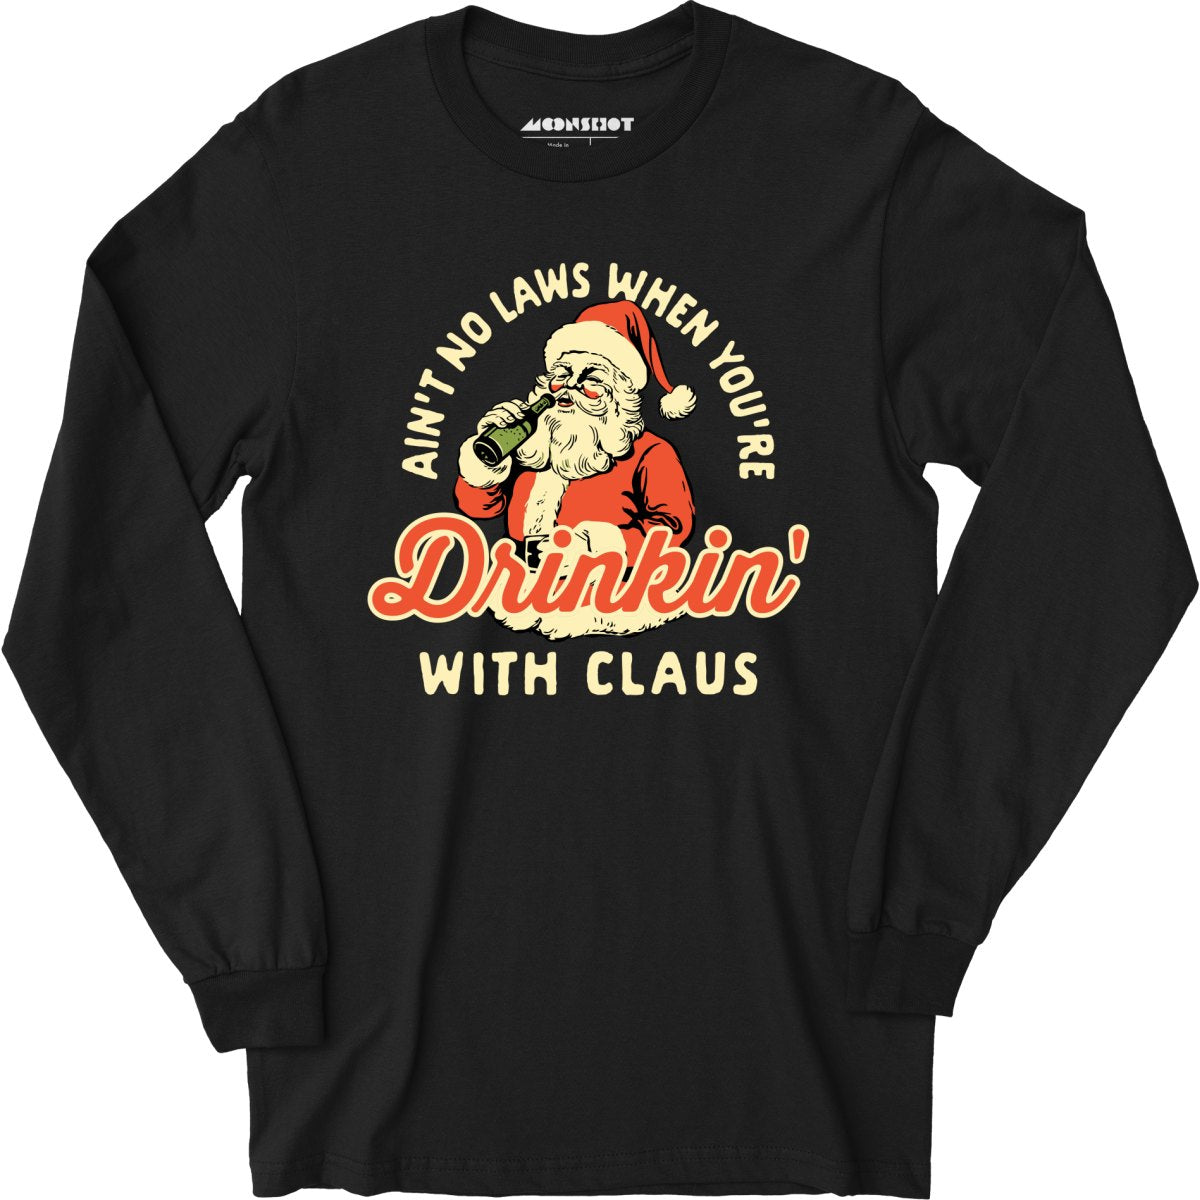 Ain't No Laws When You're Drinkin' With Claus - Long Sleeve T-Shirt